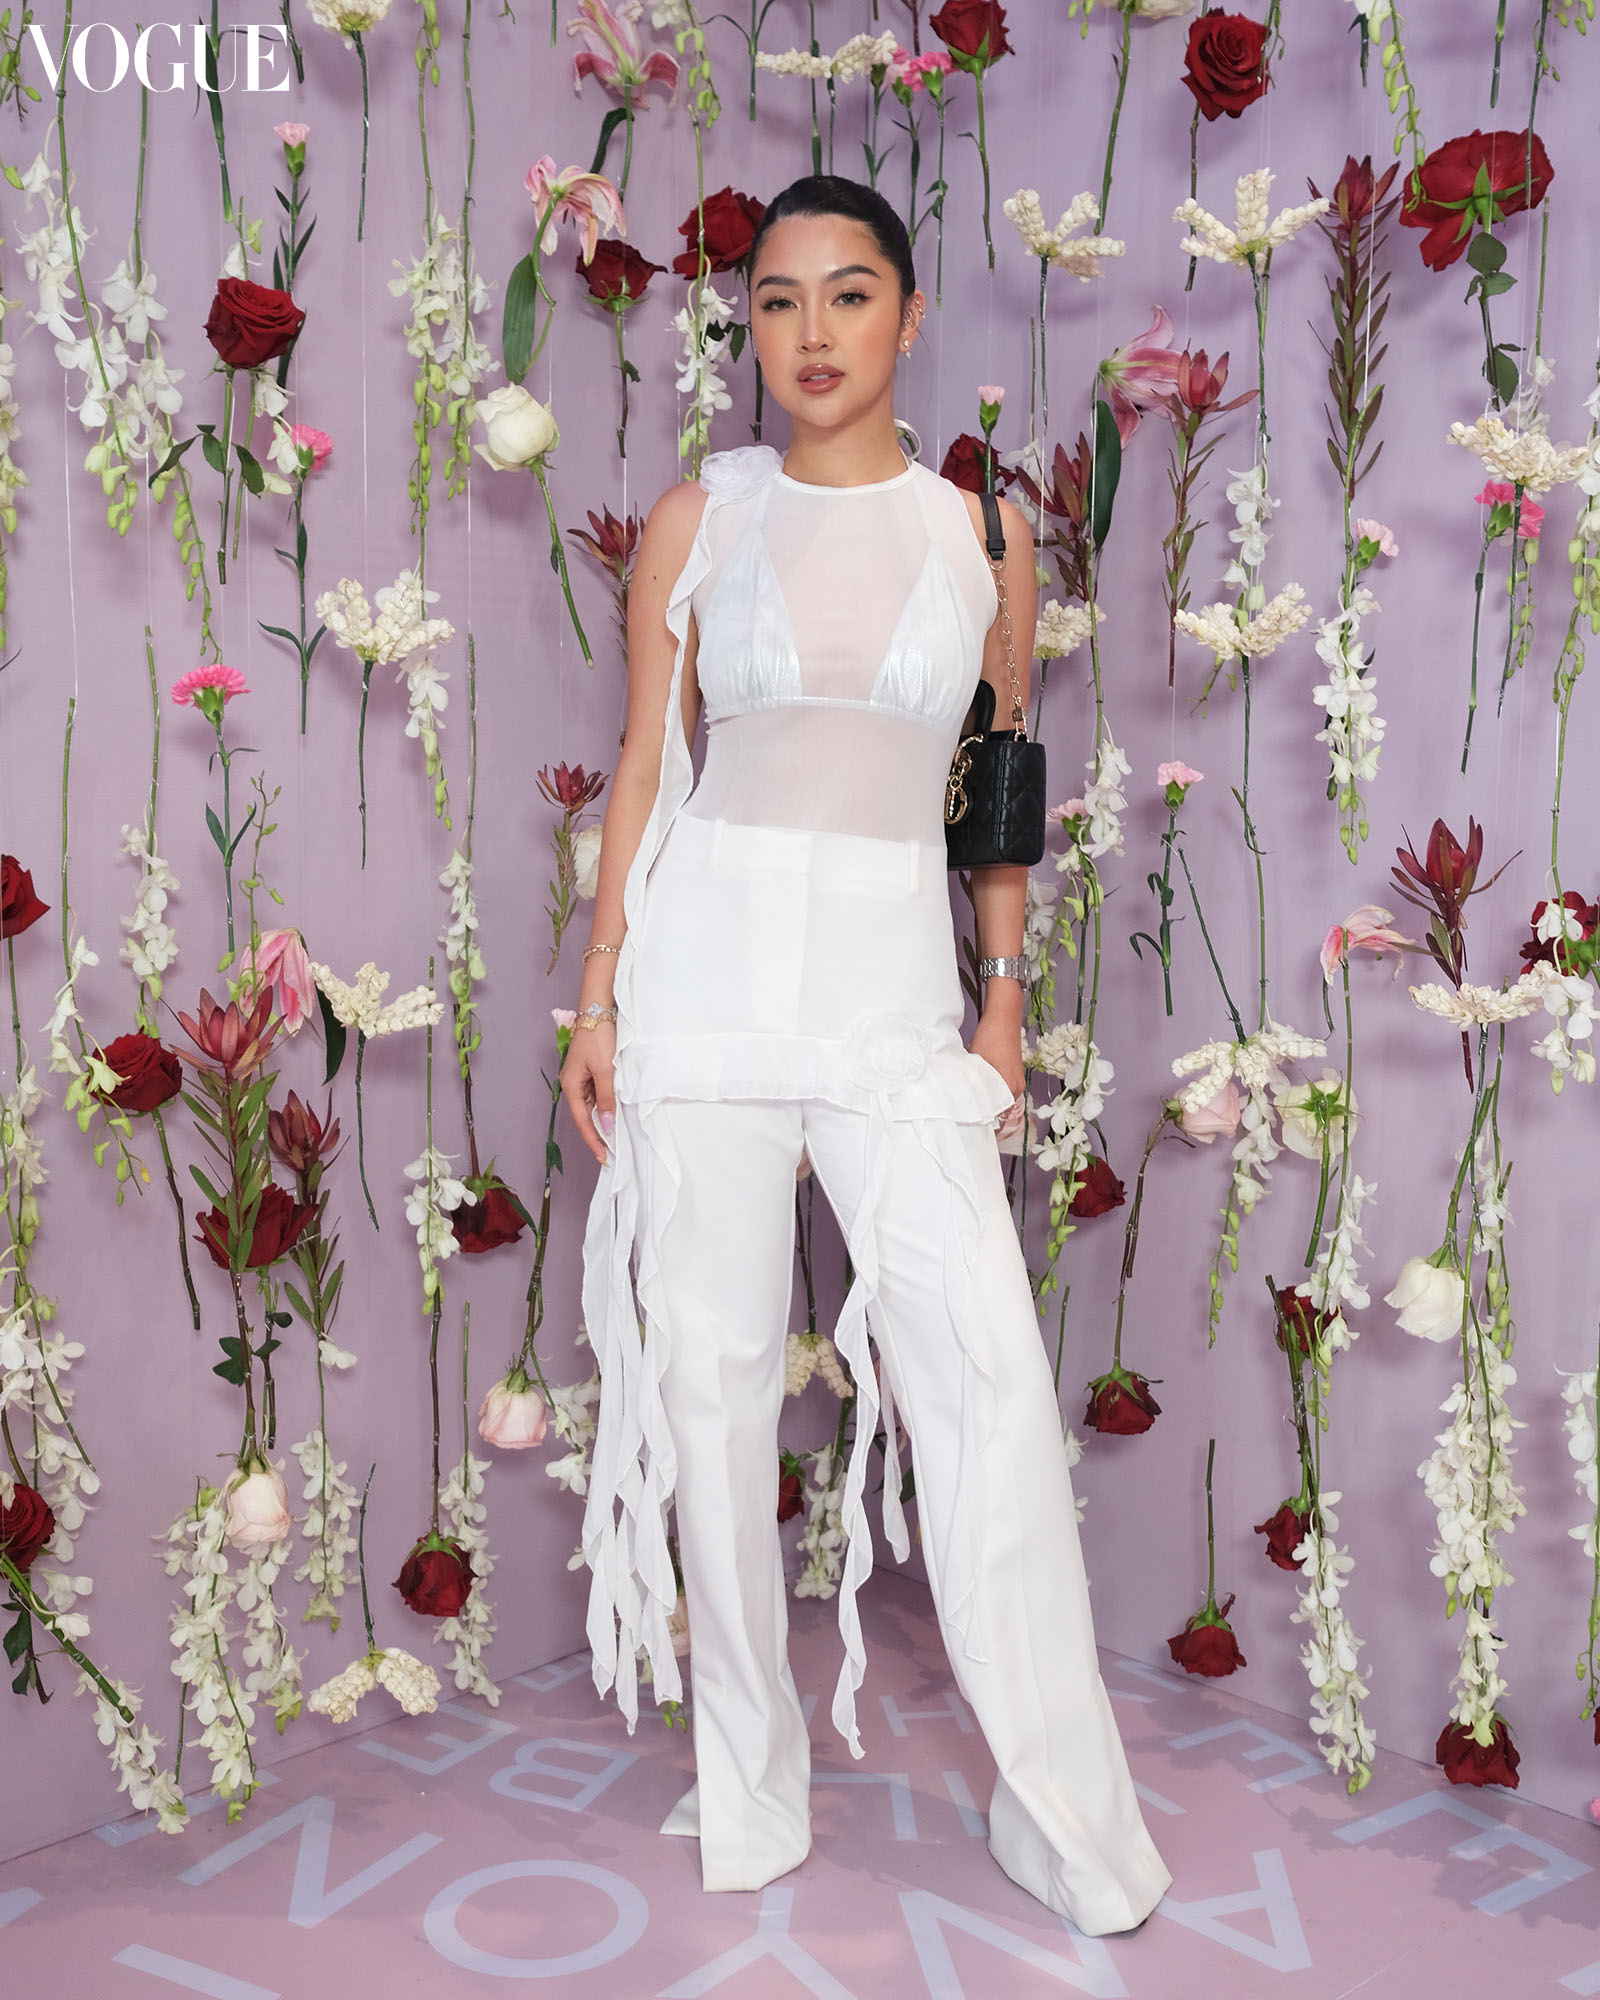 Rei Germar poses in front of a wall of floral stems at the Lancôme launch in the Philippines